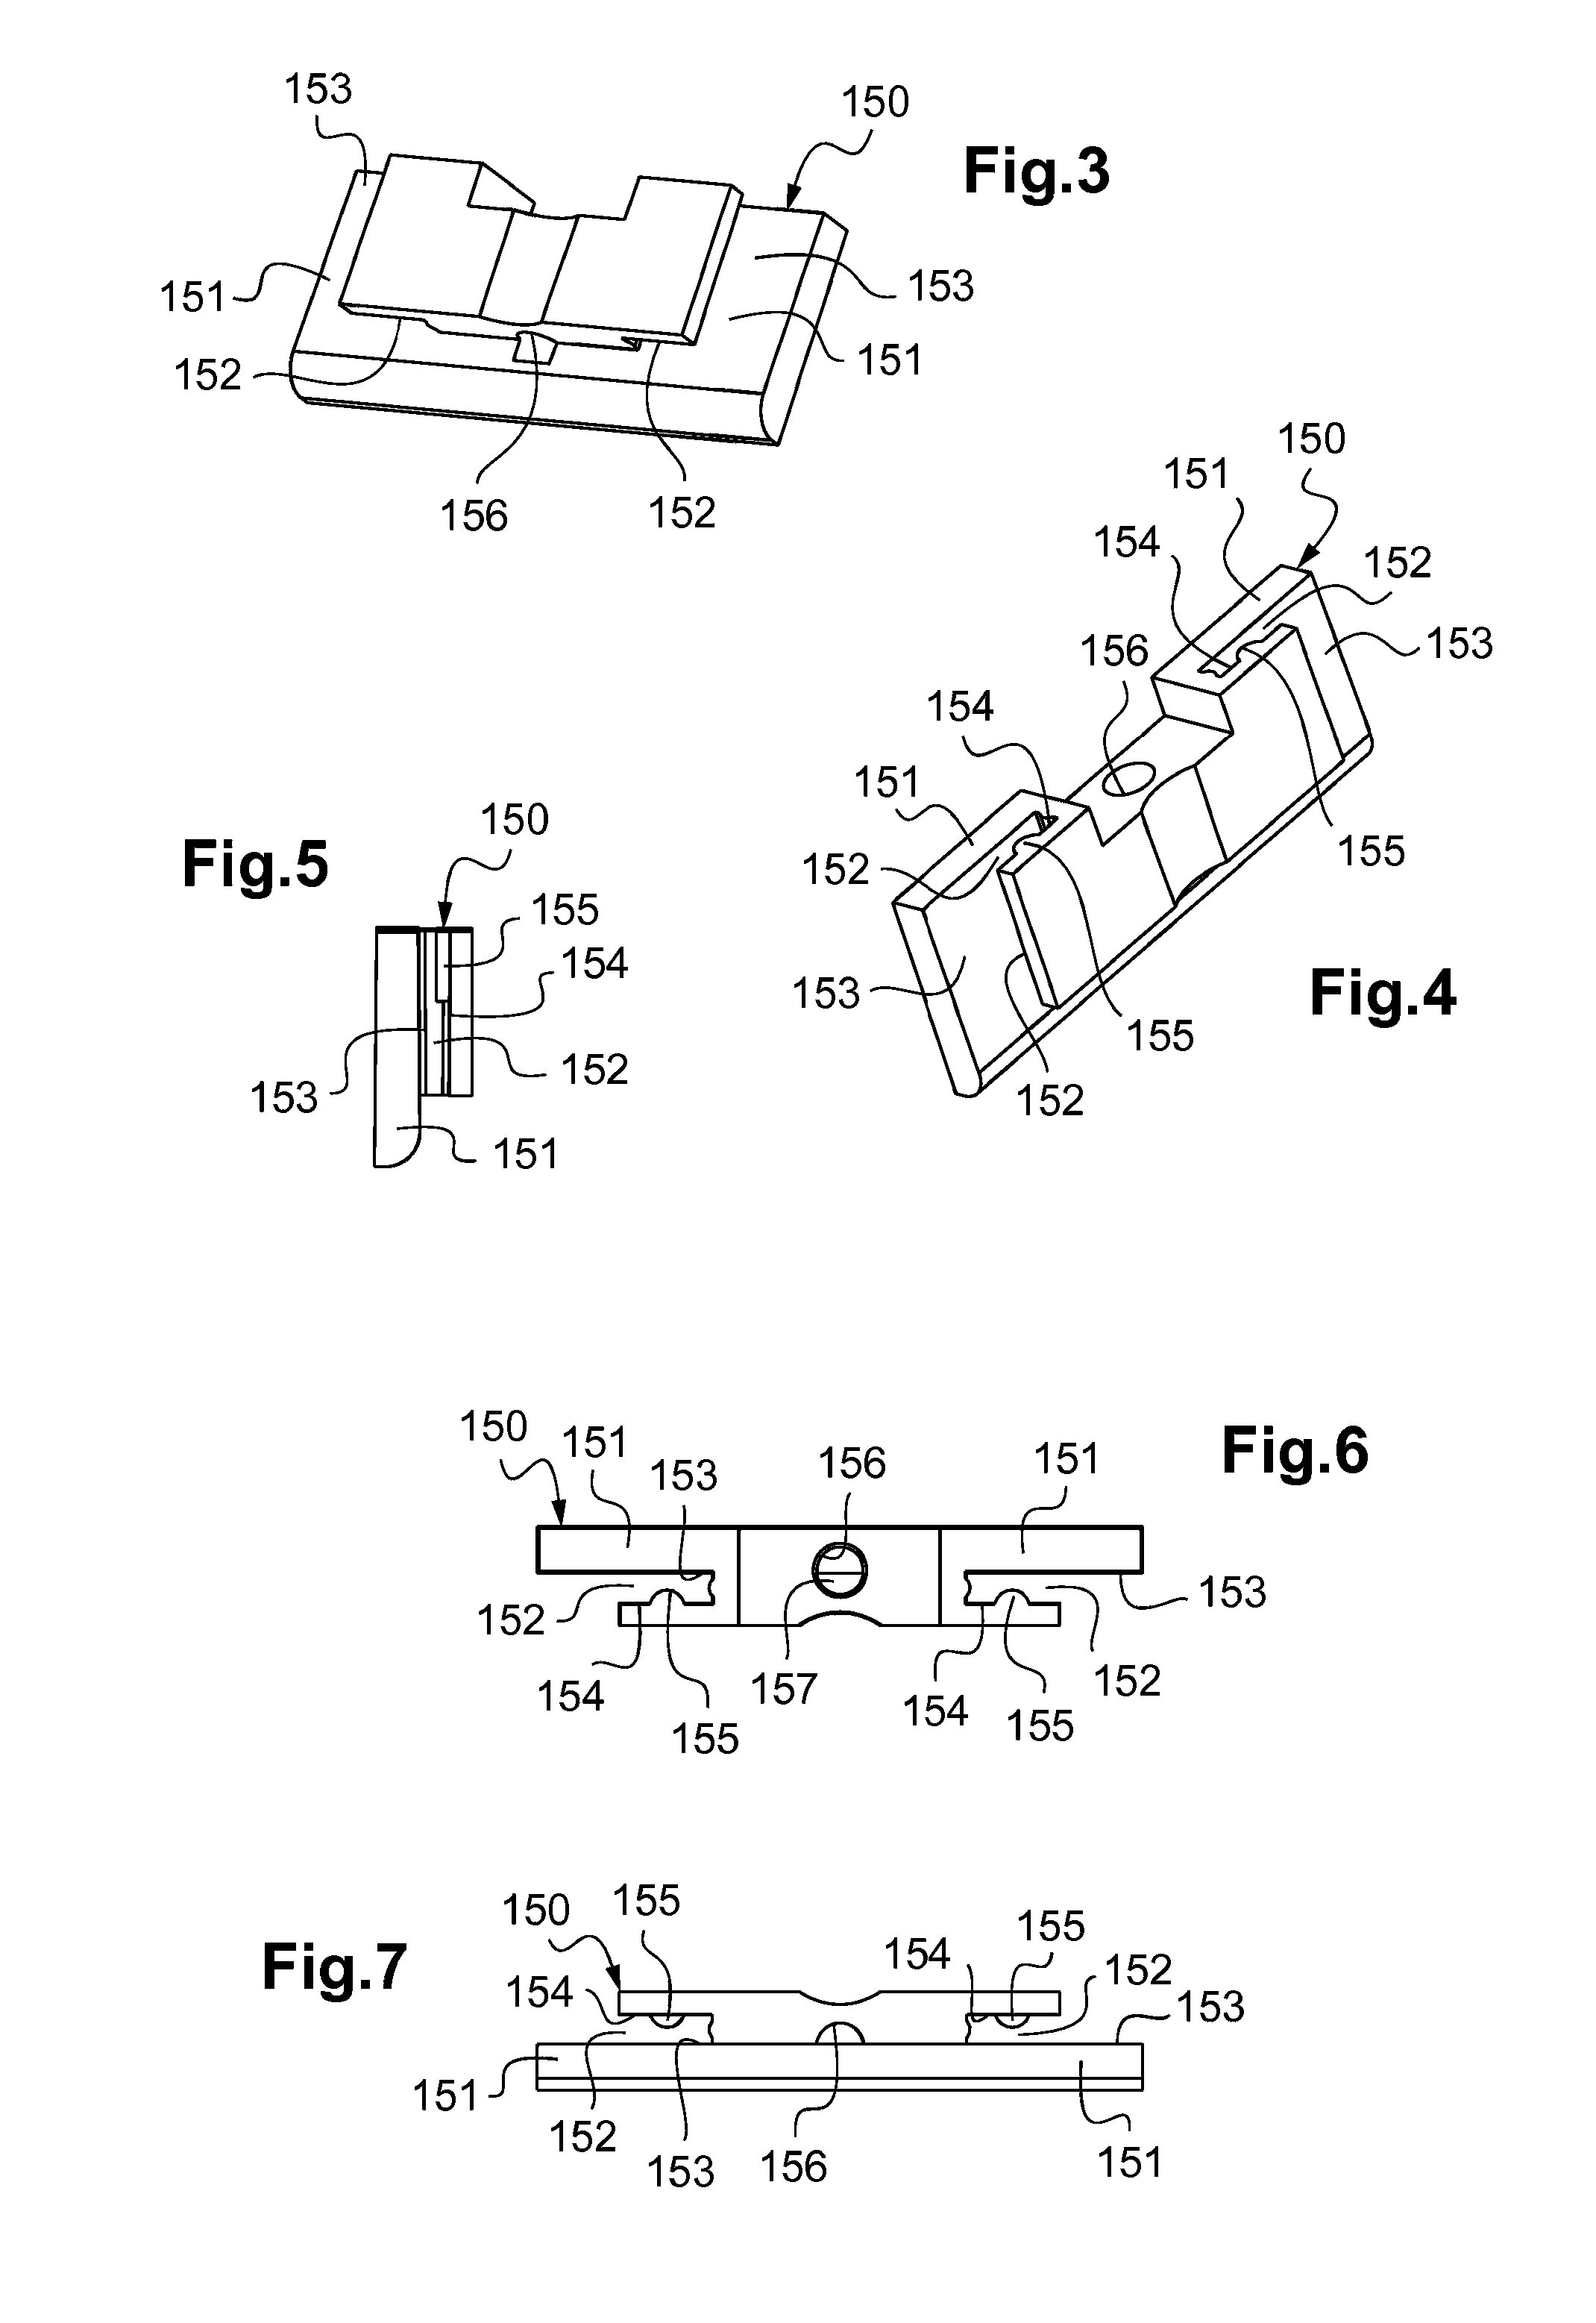 Electrical apparatus comprising a temperature sensor housed in a support element